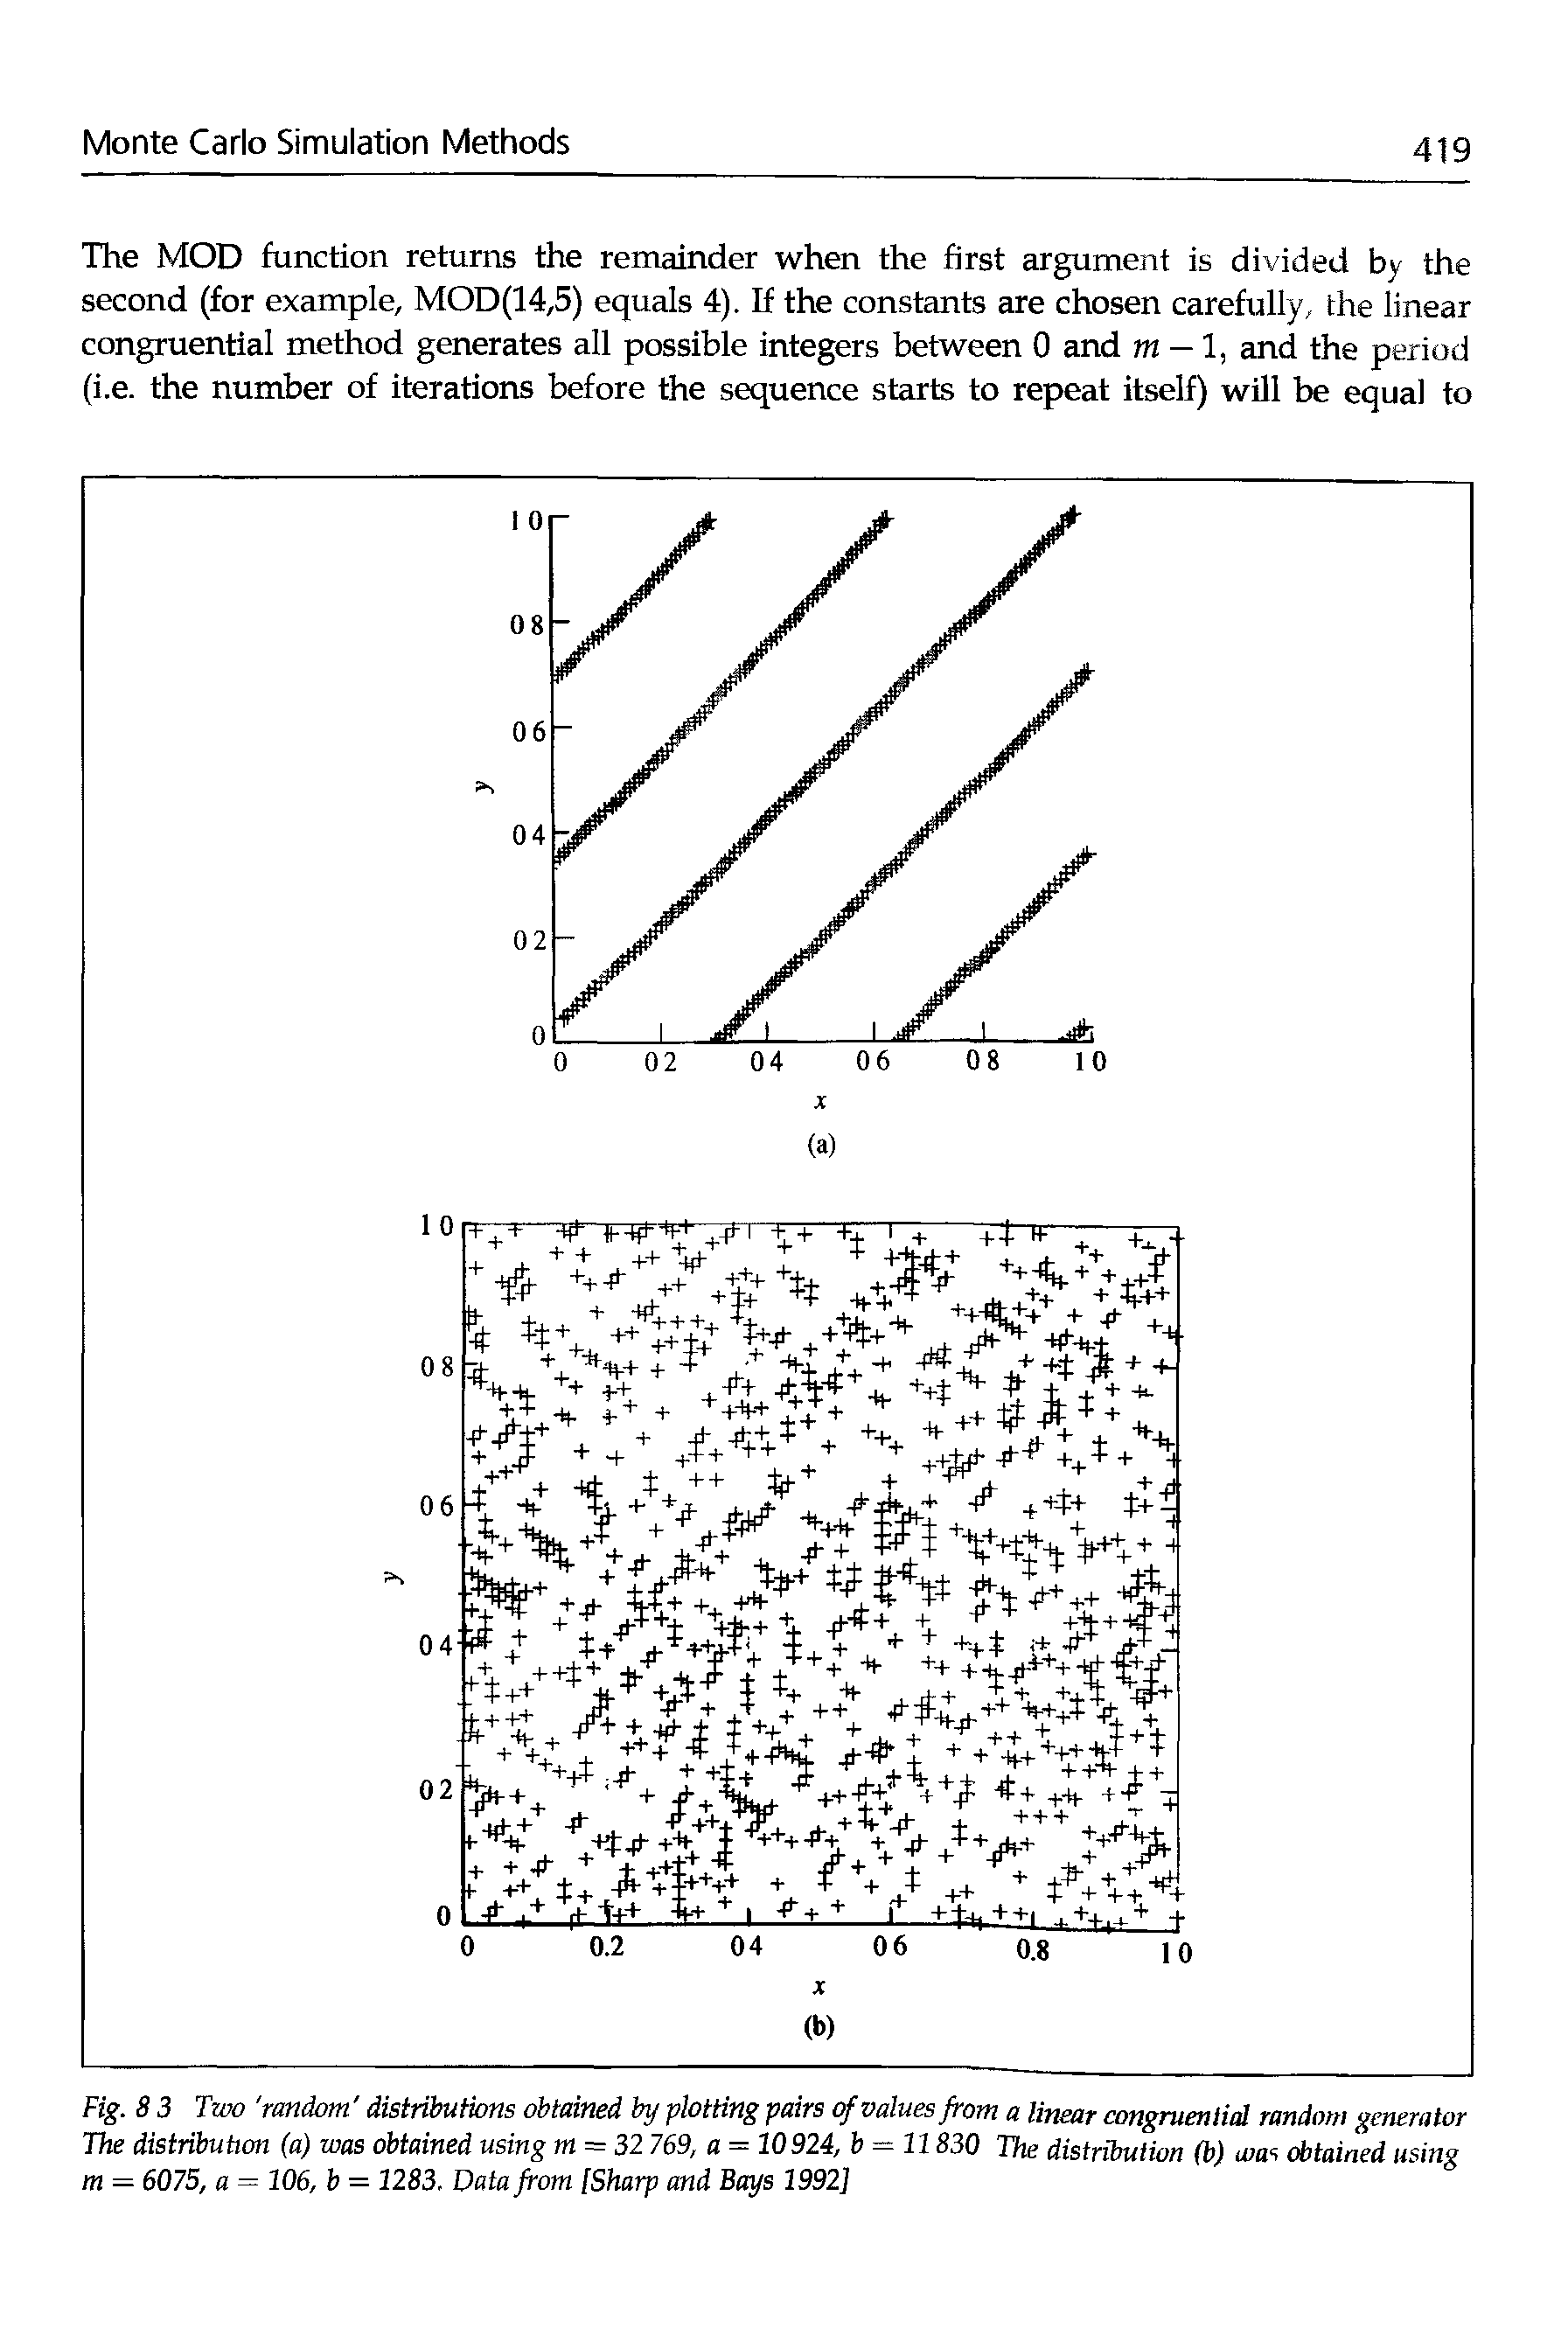 Fig. 8 3 Two random distributions obtained by plotting pairs of values from a linear congruential random generator The distribubon (a) was obtained using m = 32 769, a = 10924, b = 11830 The distribution (b) was obtained using m = 6075, a = 106, b = 1283. Data from [Sharp and Bays 1992]...